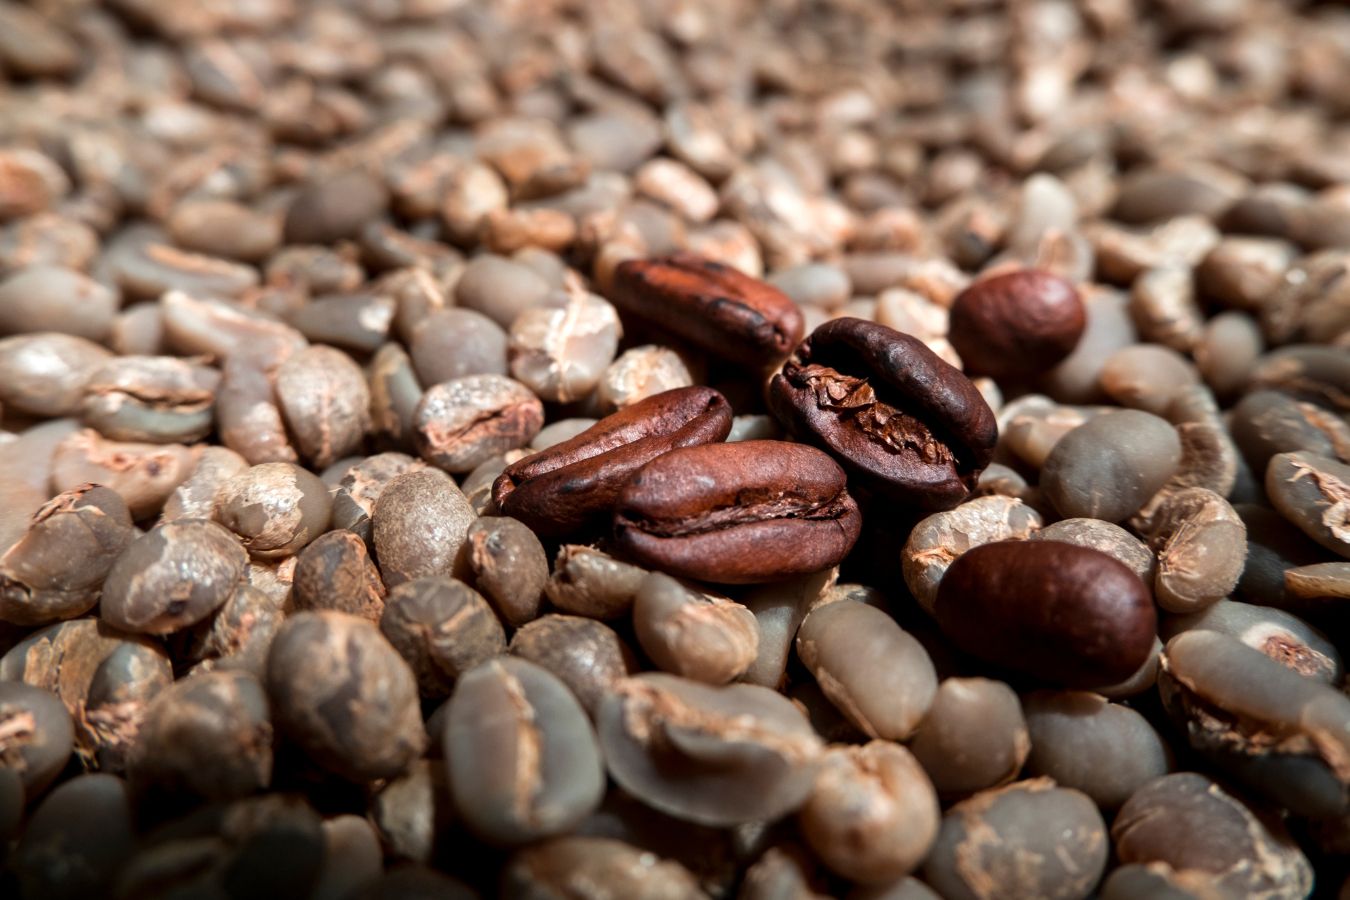 Some Of The Arabica Coffee Seeds